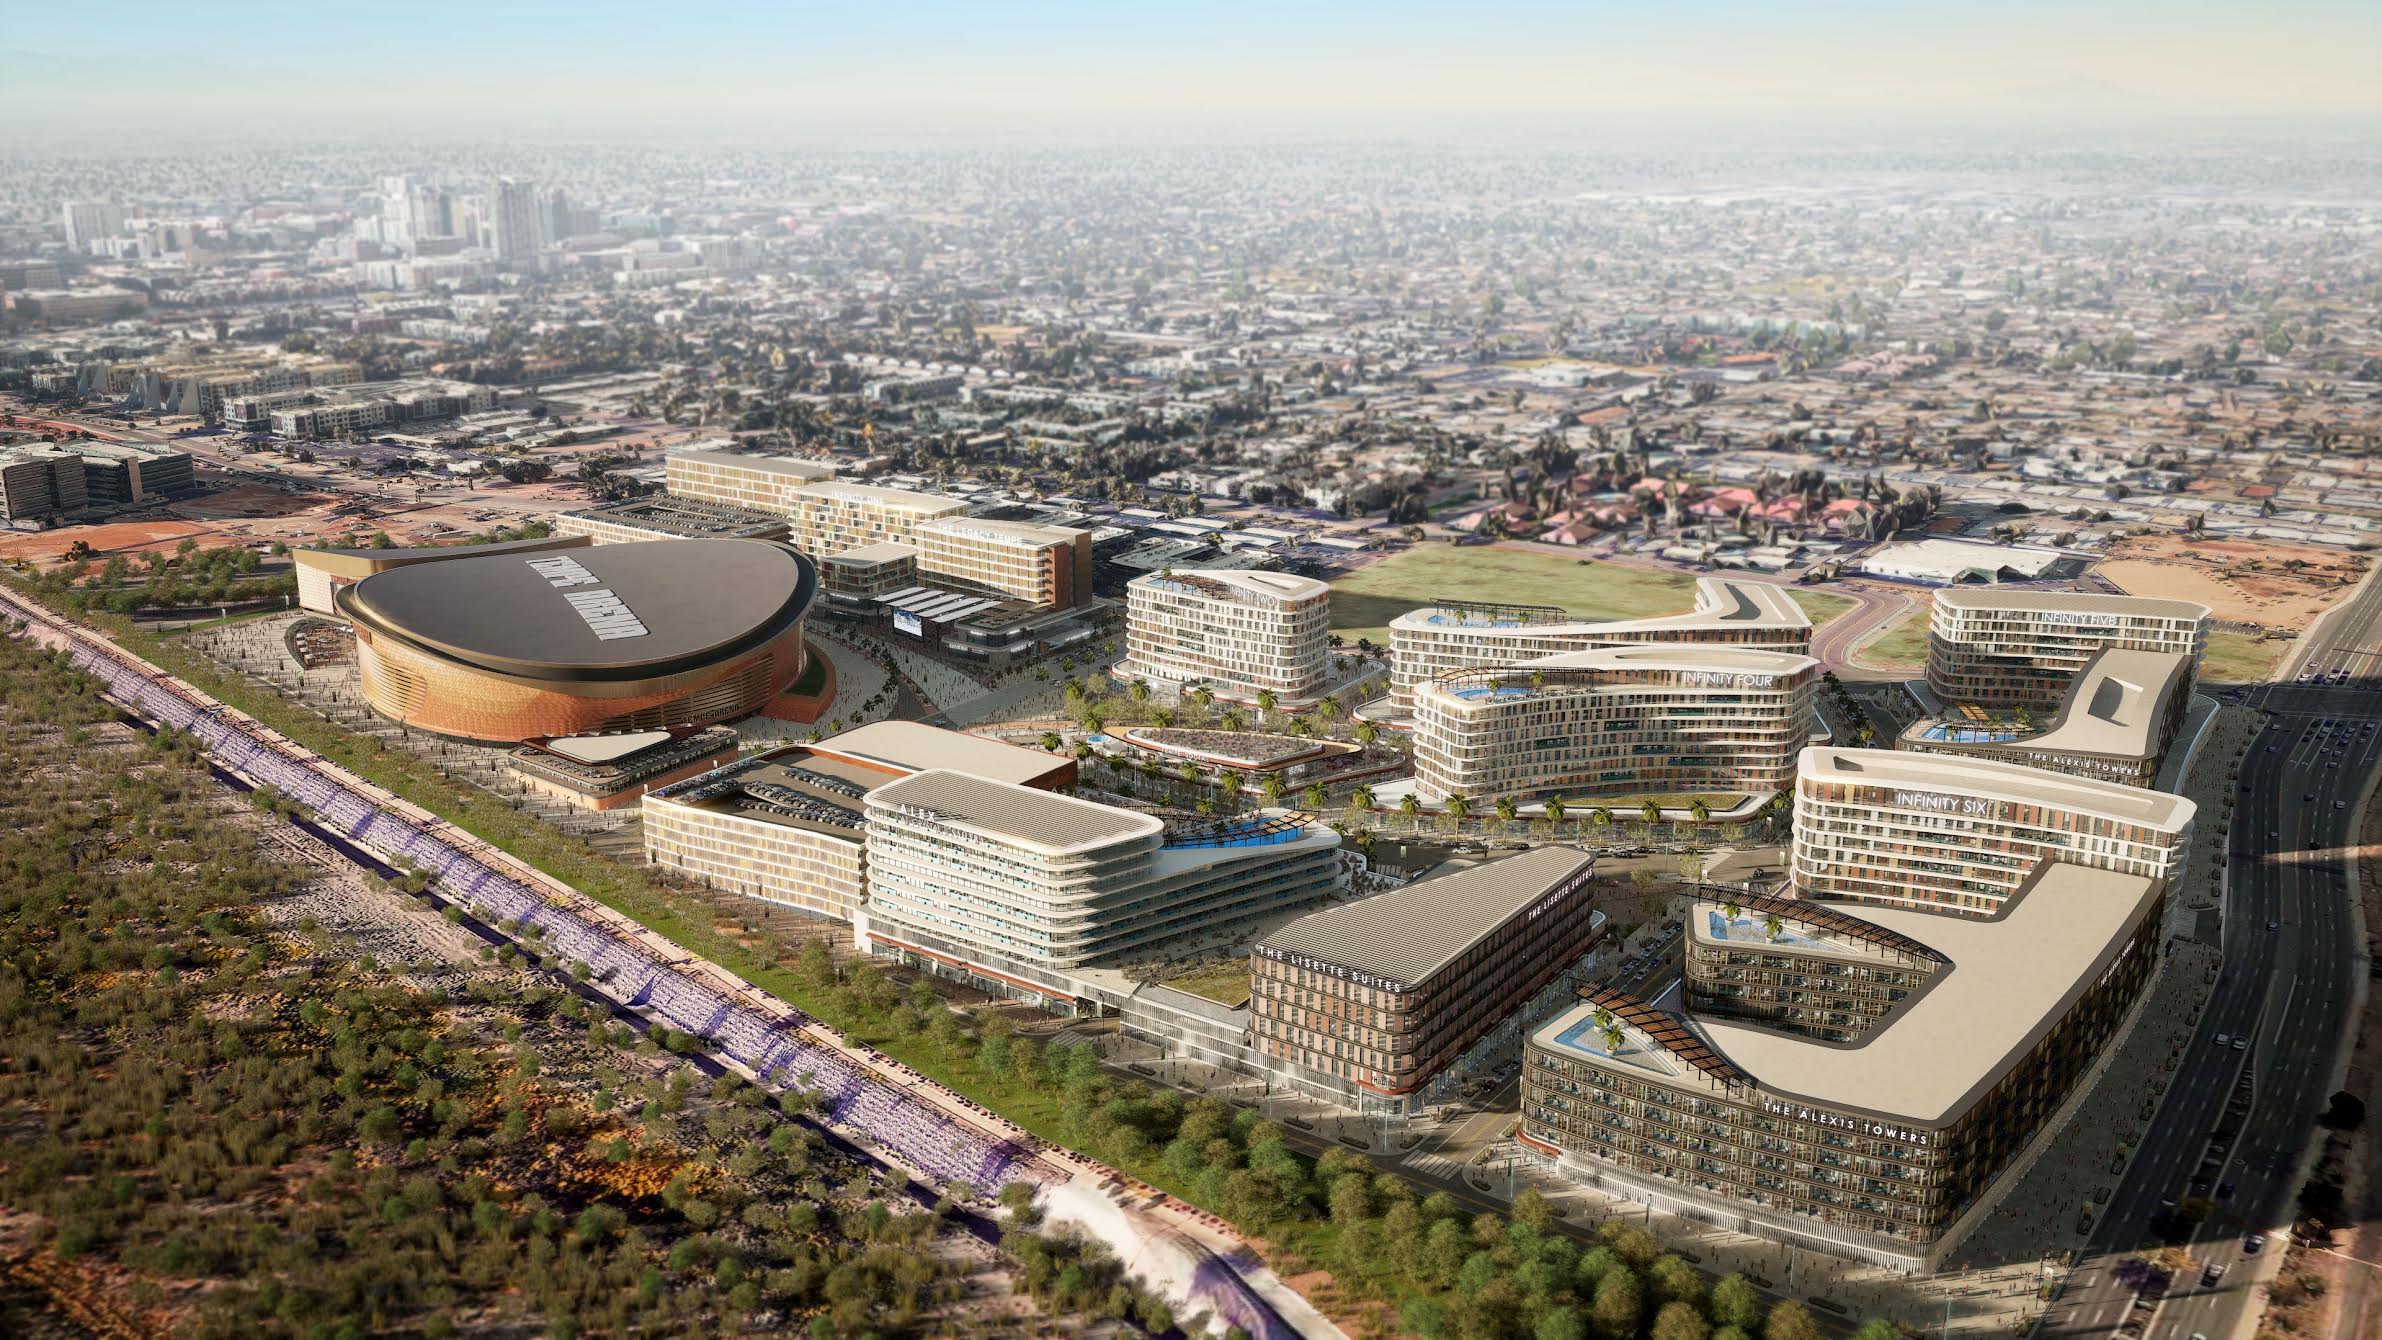 An artist rendering of the proposed Coyotes arena and adjacent entertainment district 